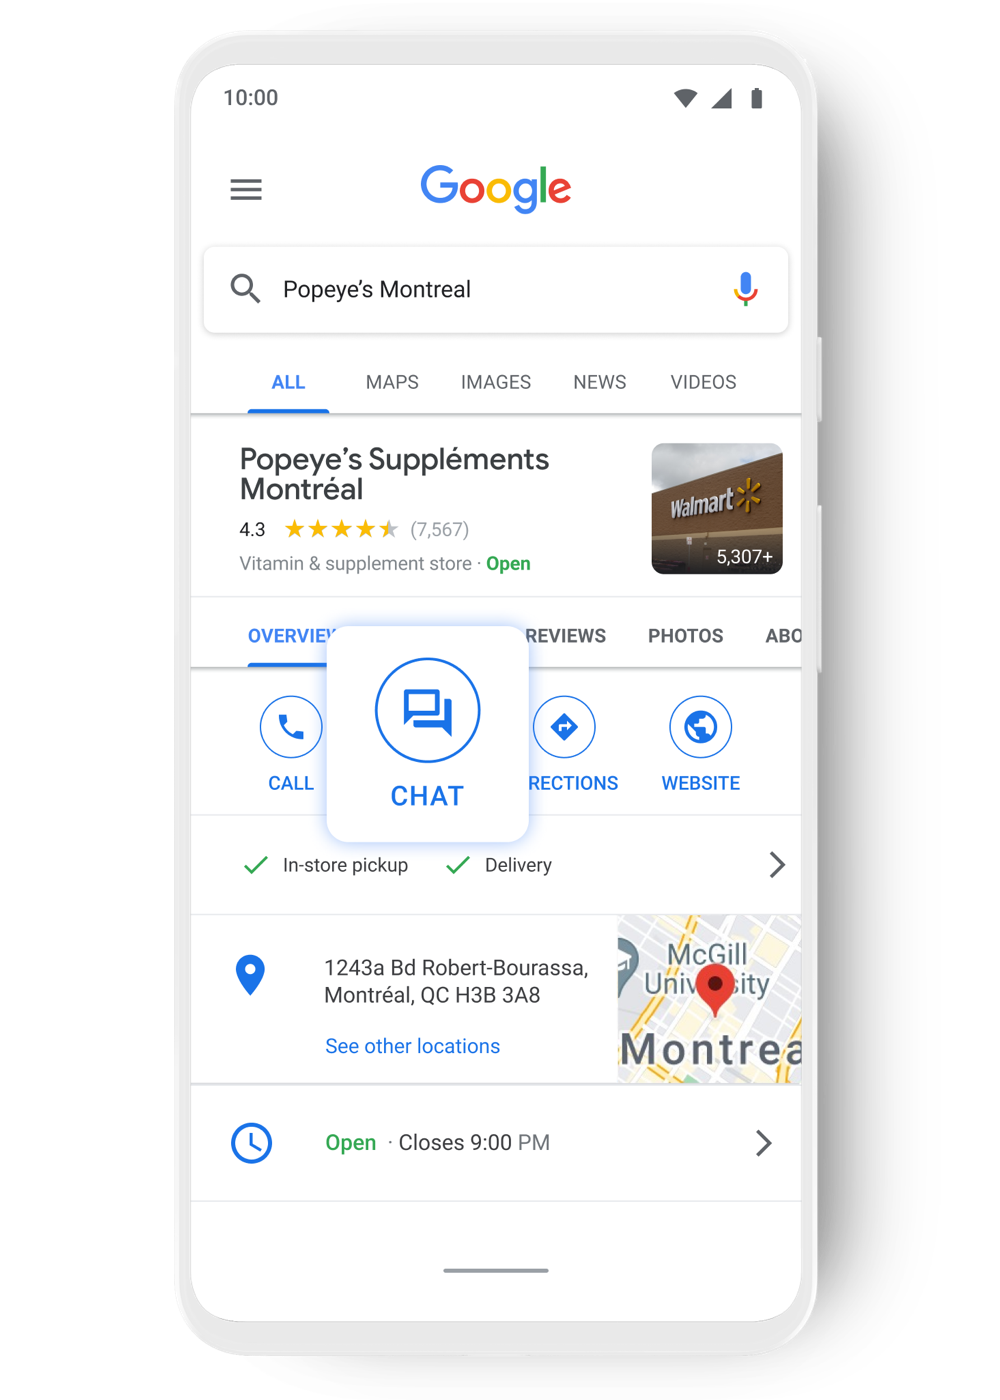 Customers chat with Popeye’s<br> through Google Search